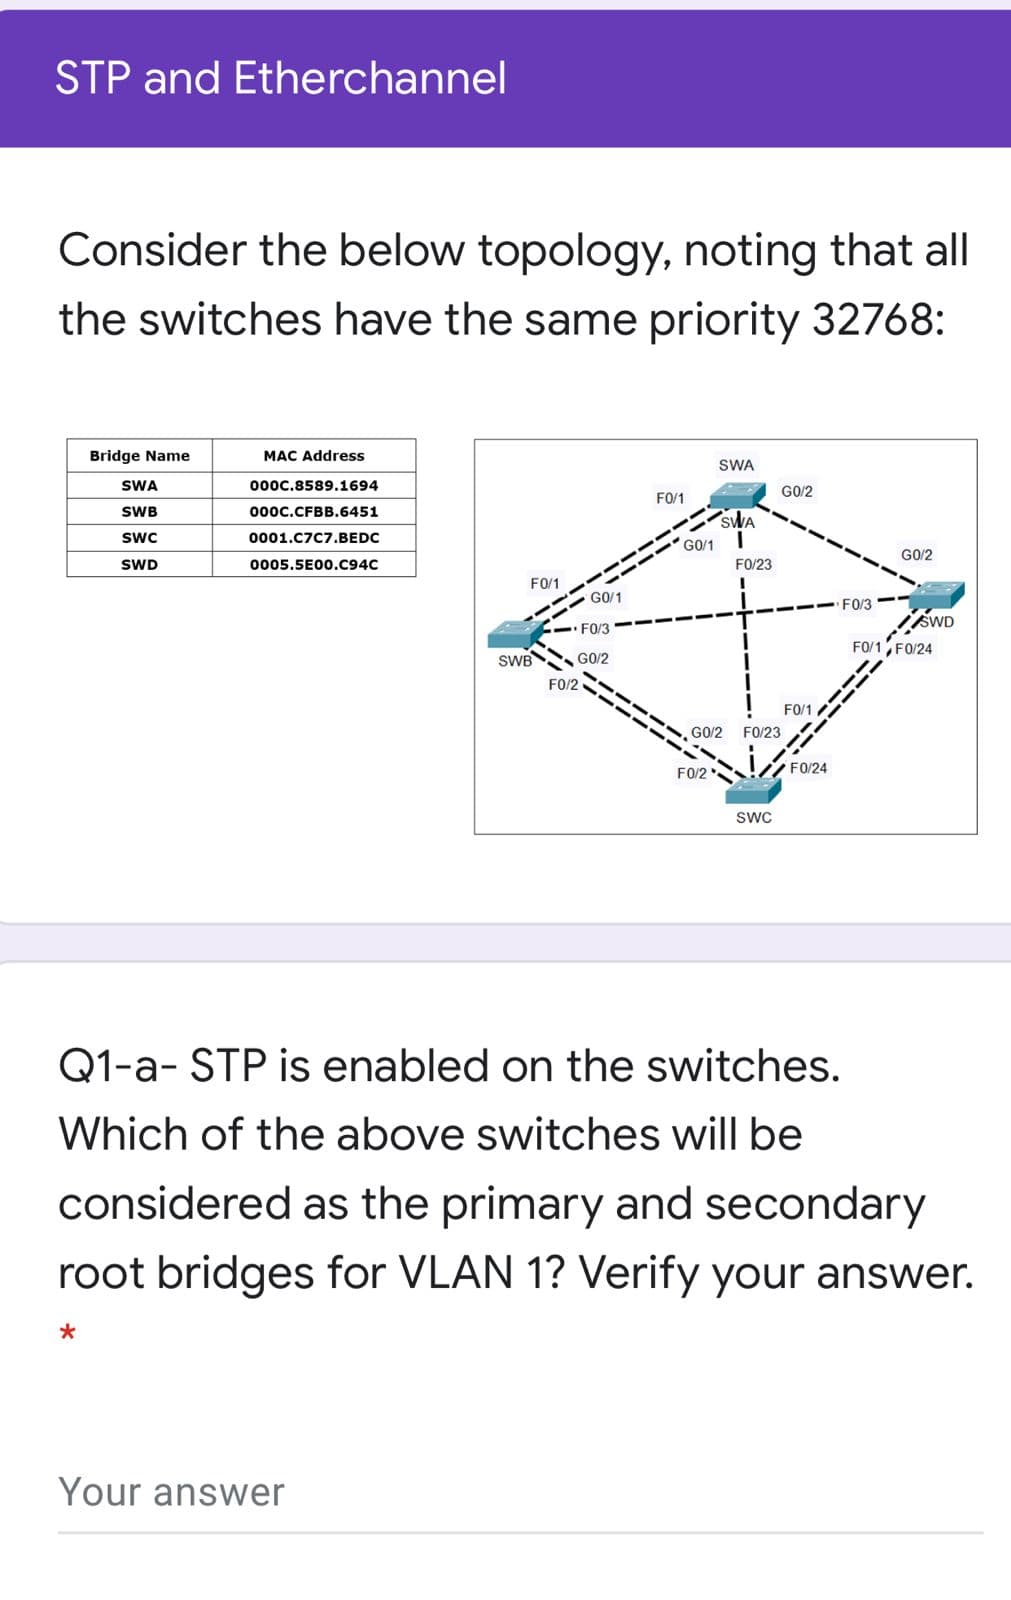 STP and Etherchannel
Consider the below topology, noting that all
the switches have the same priority 32768:
Bridge Name
MAC Address
SWA
SWA
0000,8589.1694
GO/2
FO/1
SWB
000c.CFBB.6451
SwC
0001.C7C7.BEDC
GO/1
GO/2
SWD
0005.5E00.C94C
FO/23
FO/1
GO/1
--- F0/3-
- FO/3
FO/1, FO/24
SWB G0/2
FO/2
FO/1
G0/2
FO/23
FO/24
FO/2
SWC
Q1-a- STP is enabled on the switches.
Which of the above switches will be
considered as the primary and secondary
root bridges for VLAN 1? Verify your answer.
Your answer
